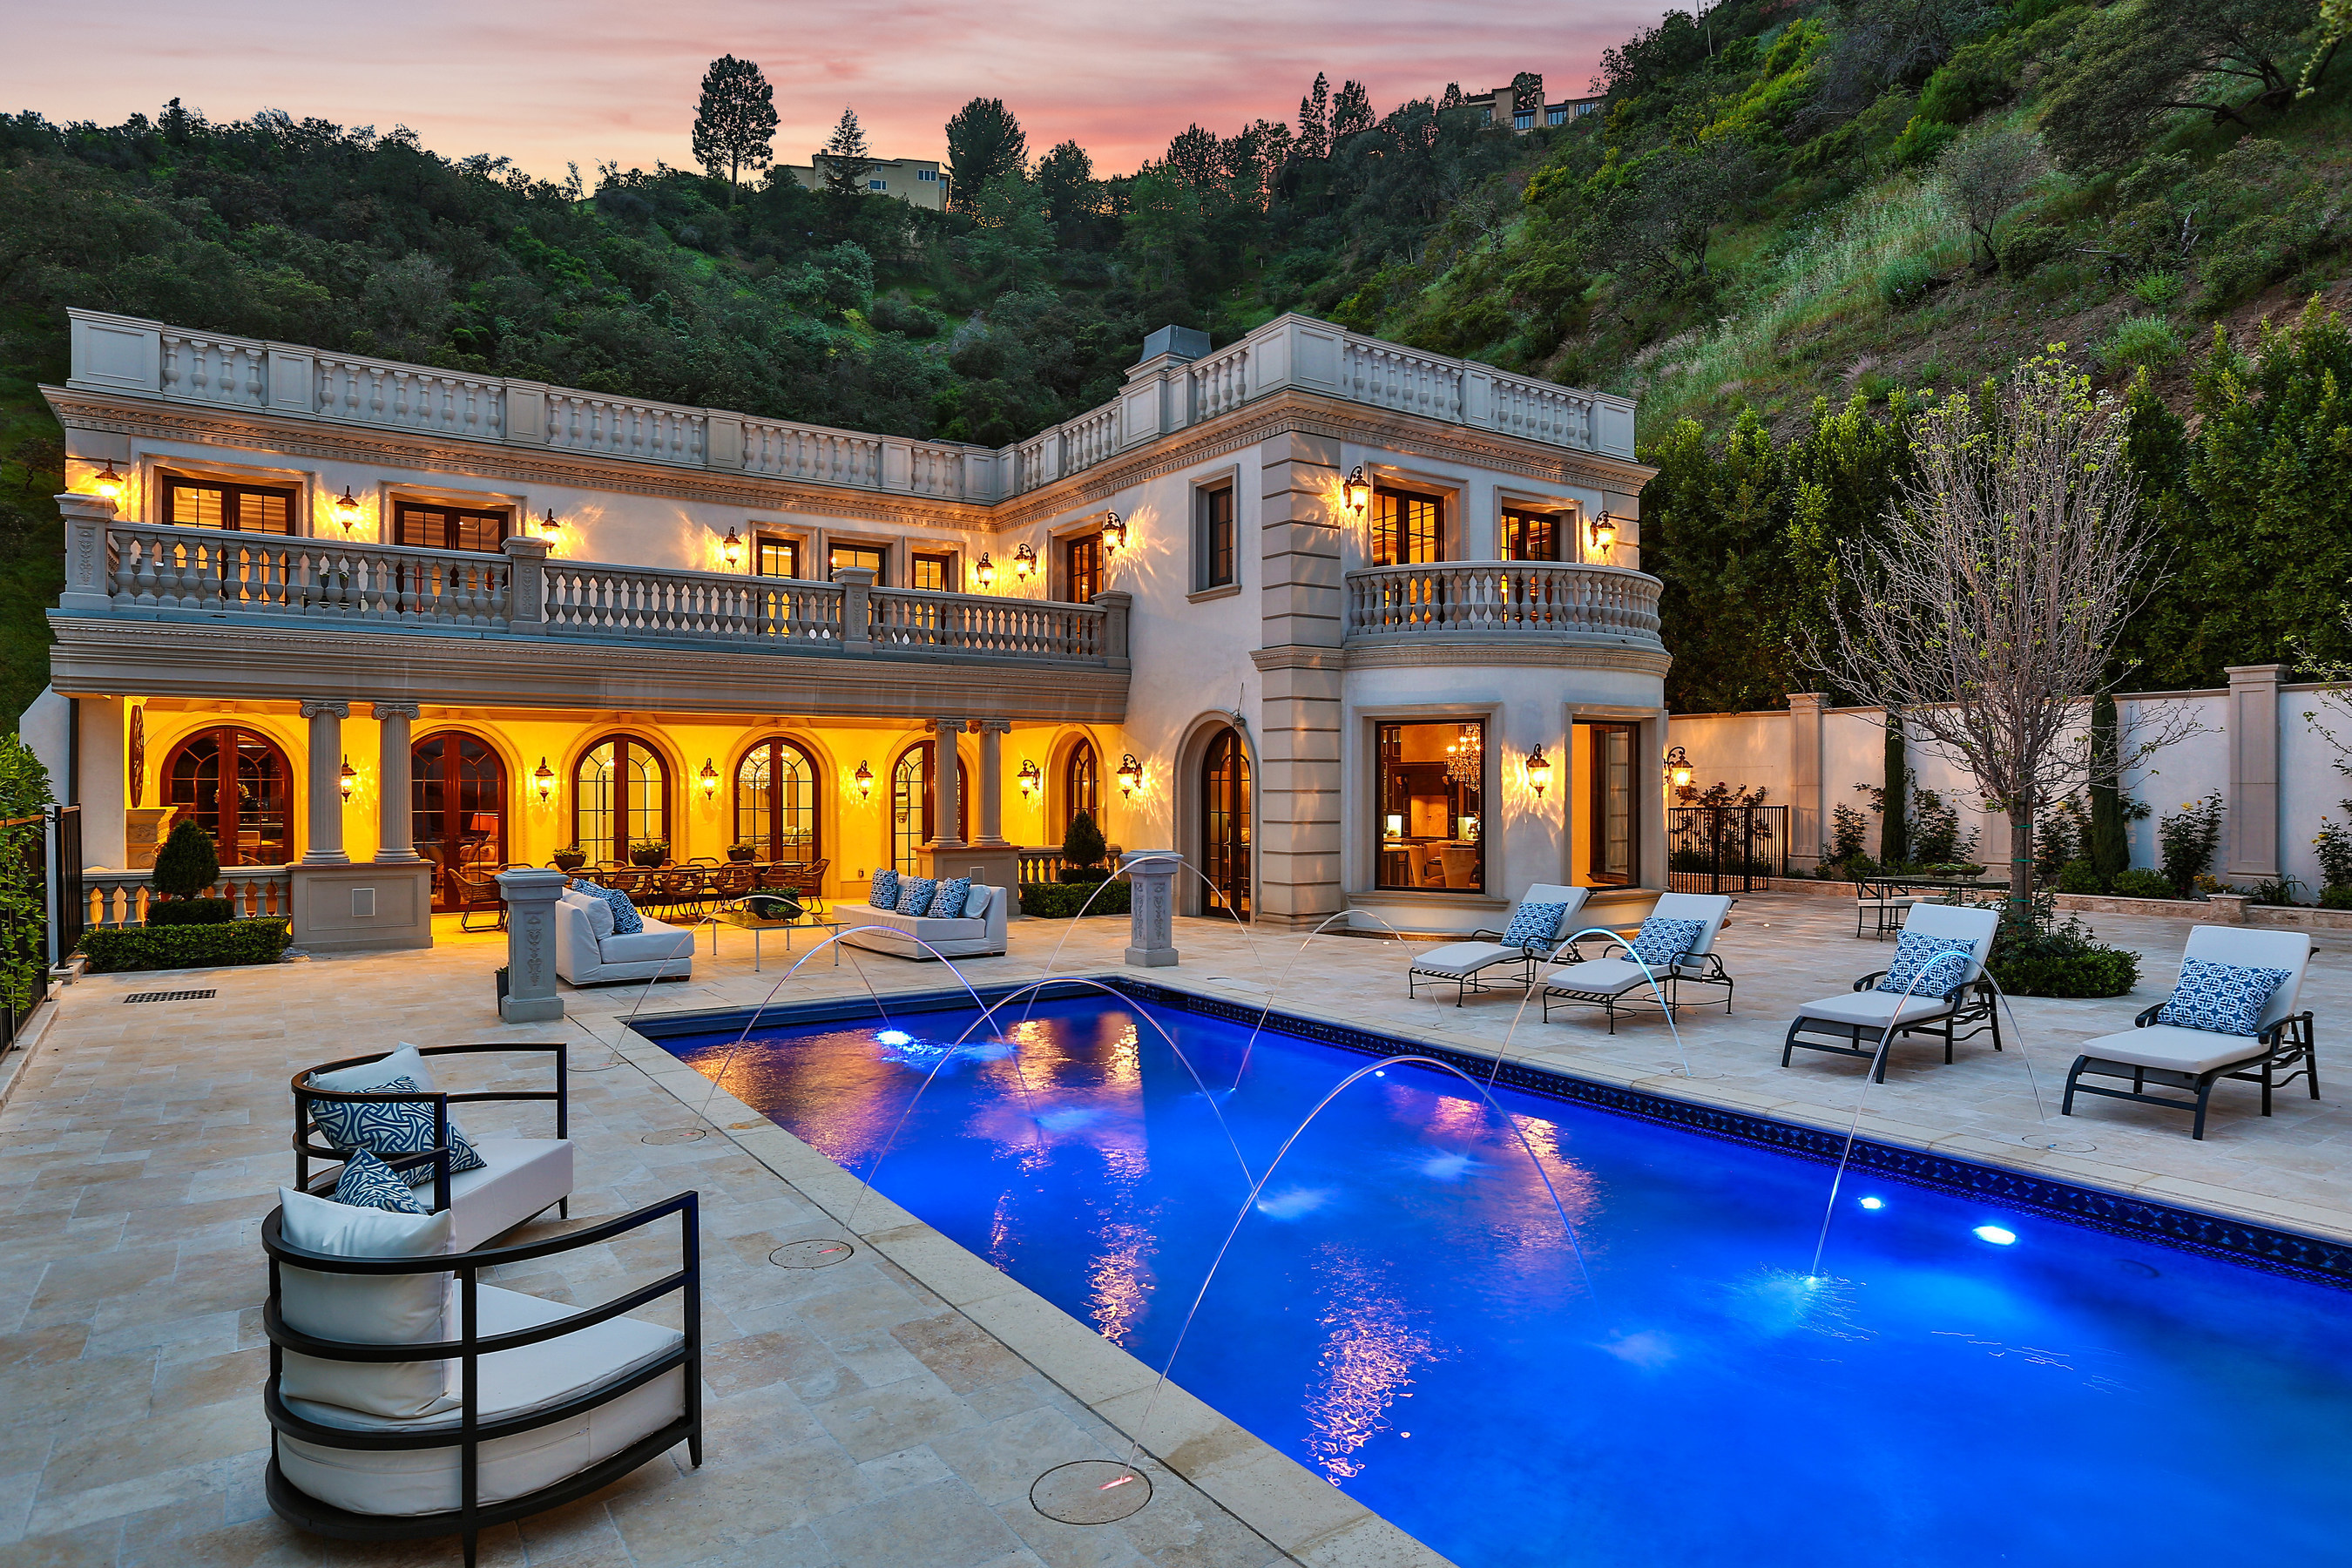 A classically inspired compound on nearly four prime view acres in Bel-Air has been listed by Aaron Kirman, President of Aaroe Estates, the luxury property division of John Aaroe Group, and Estates Agent Neyshia Go for $26 million.